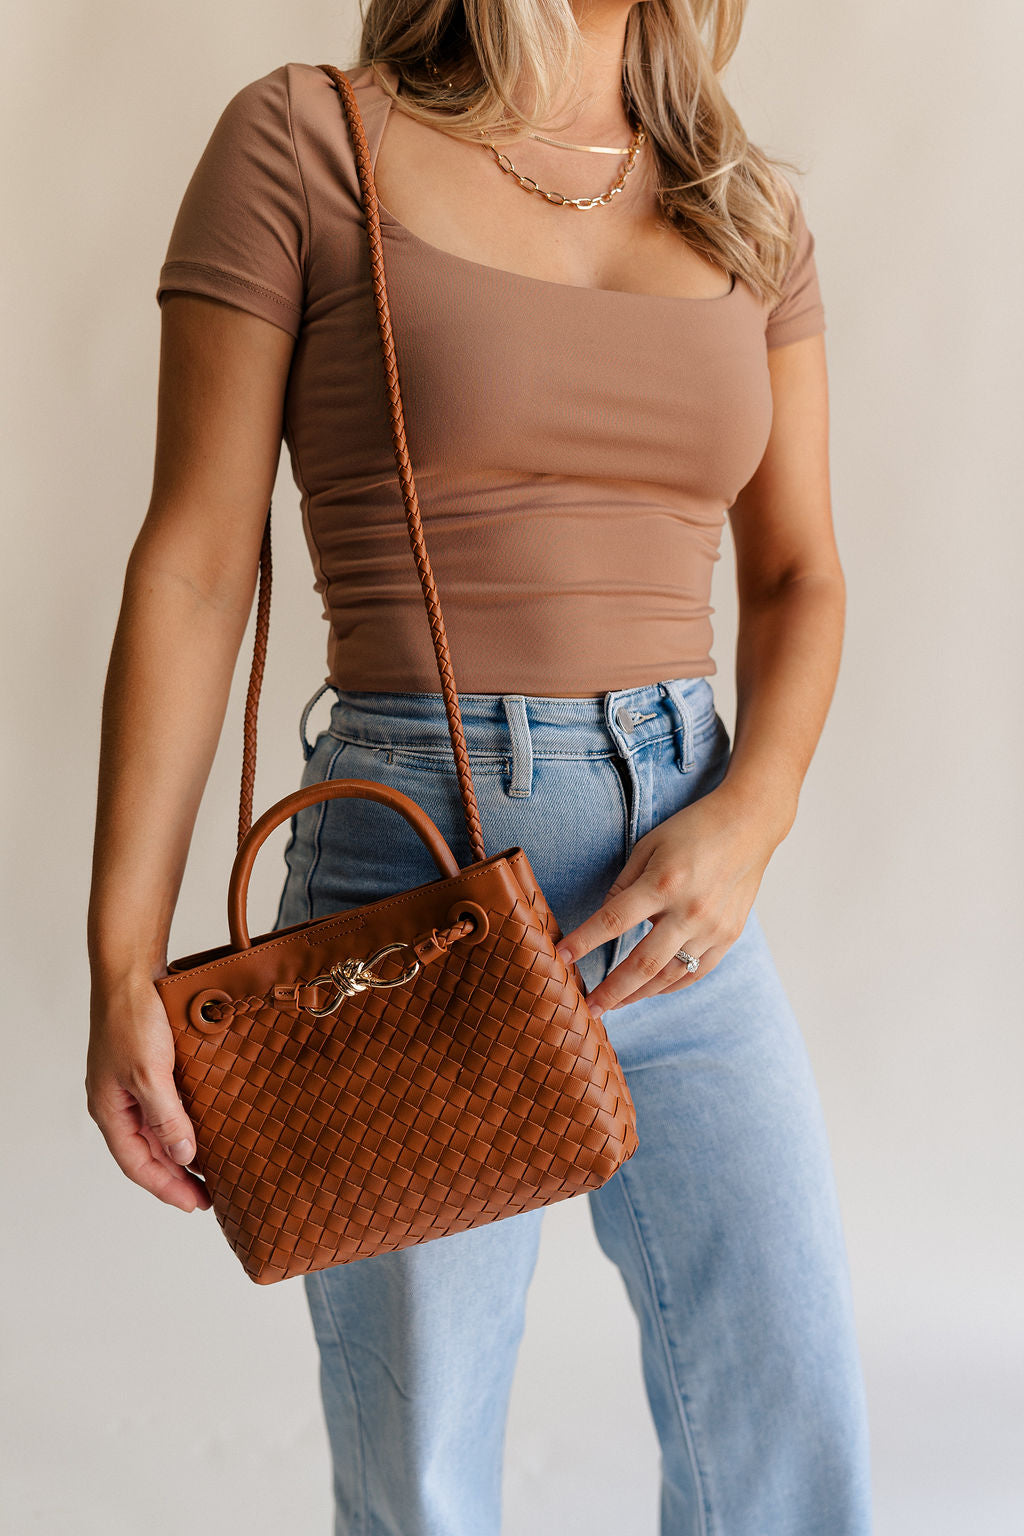 Female model is wearing the Blakely Light Brown Braided Purse that has a brown woven body, small handle, cross body strap, and a front gold accent detail. Shown on model's shoulder